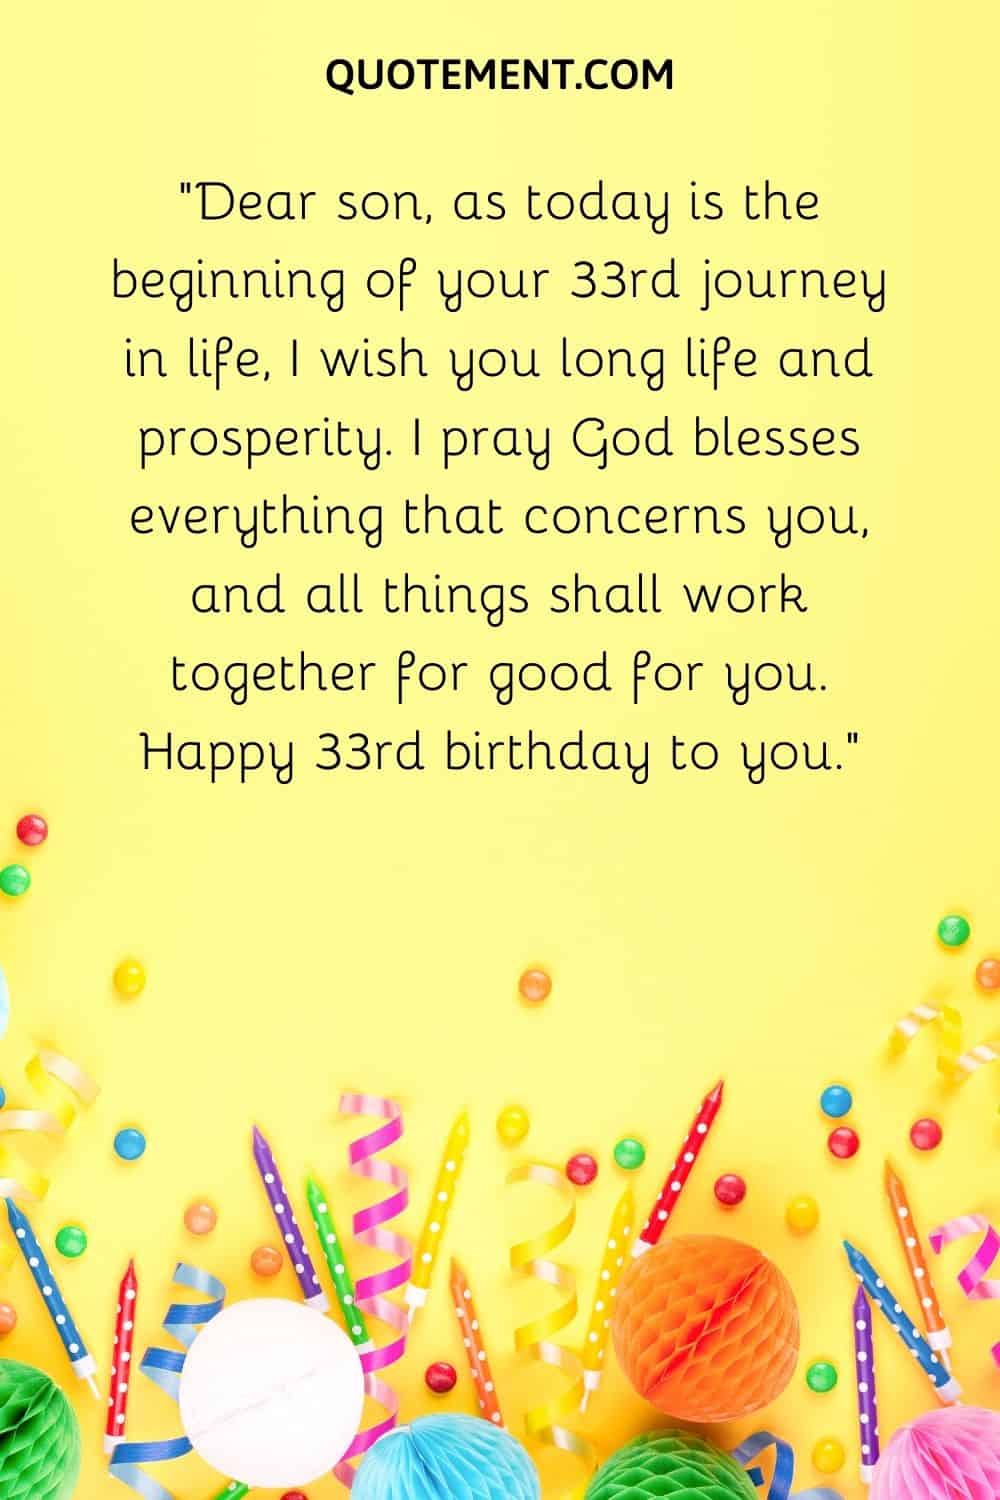 today is the beginning of your 33rd journey in life